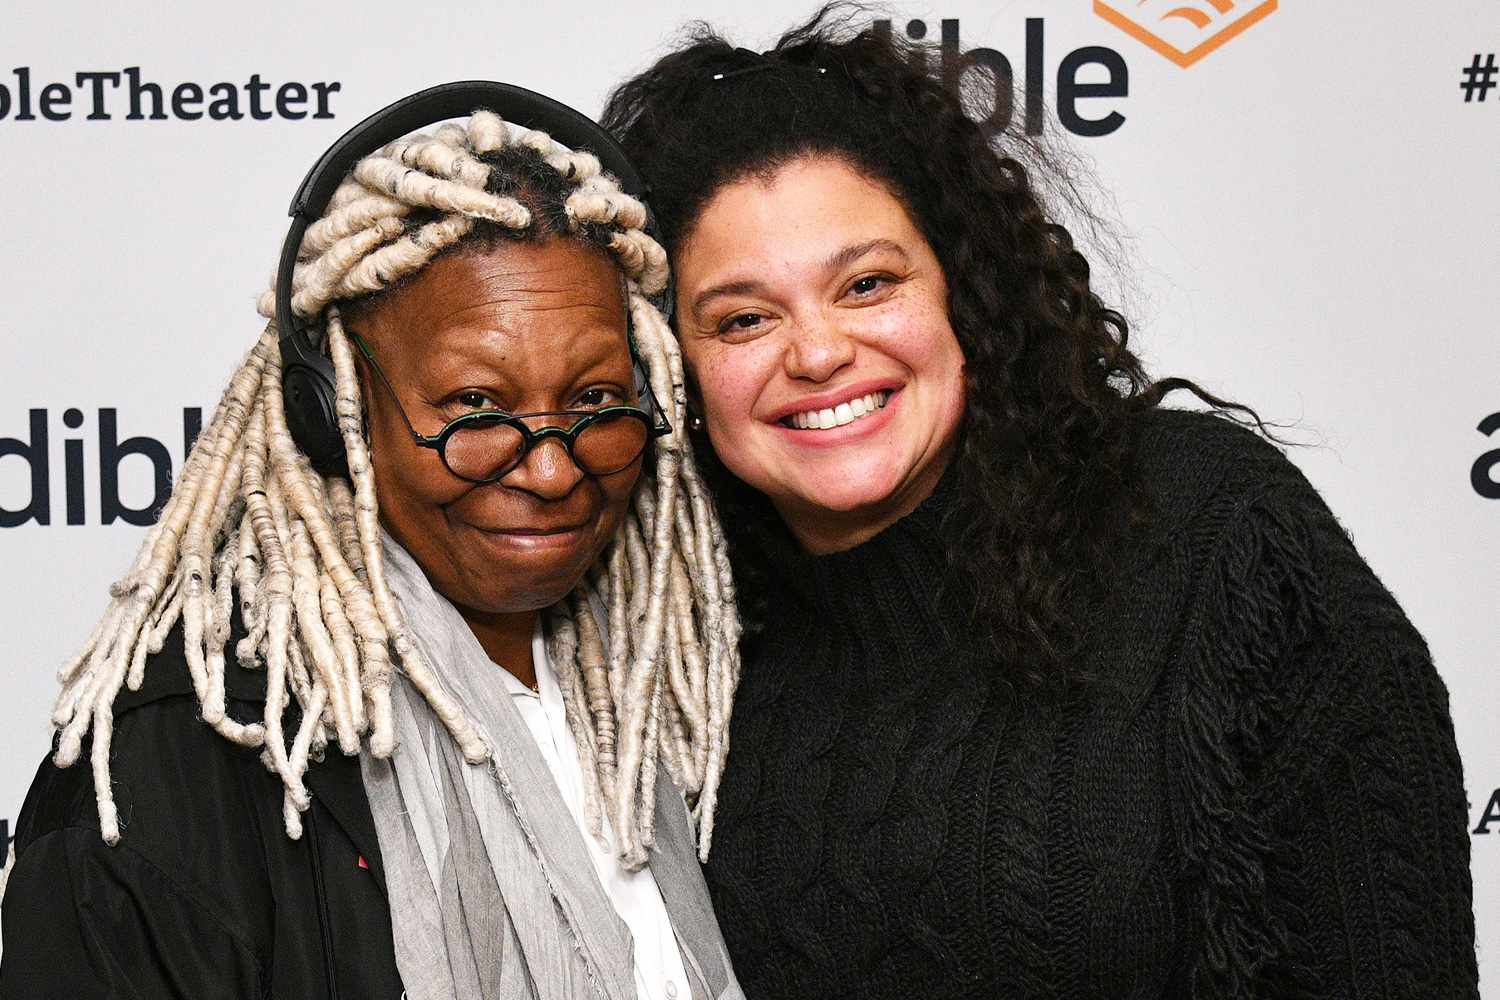 Whoopi Goldberg Voices Michelle Buteau's Breasts in New Film “Babes”: 'Dream Come True'